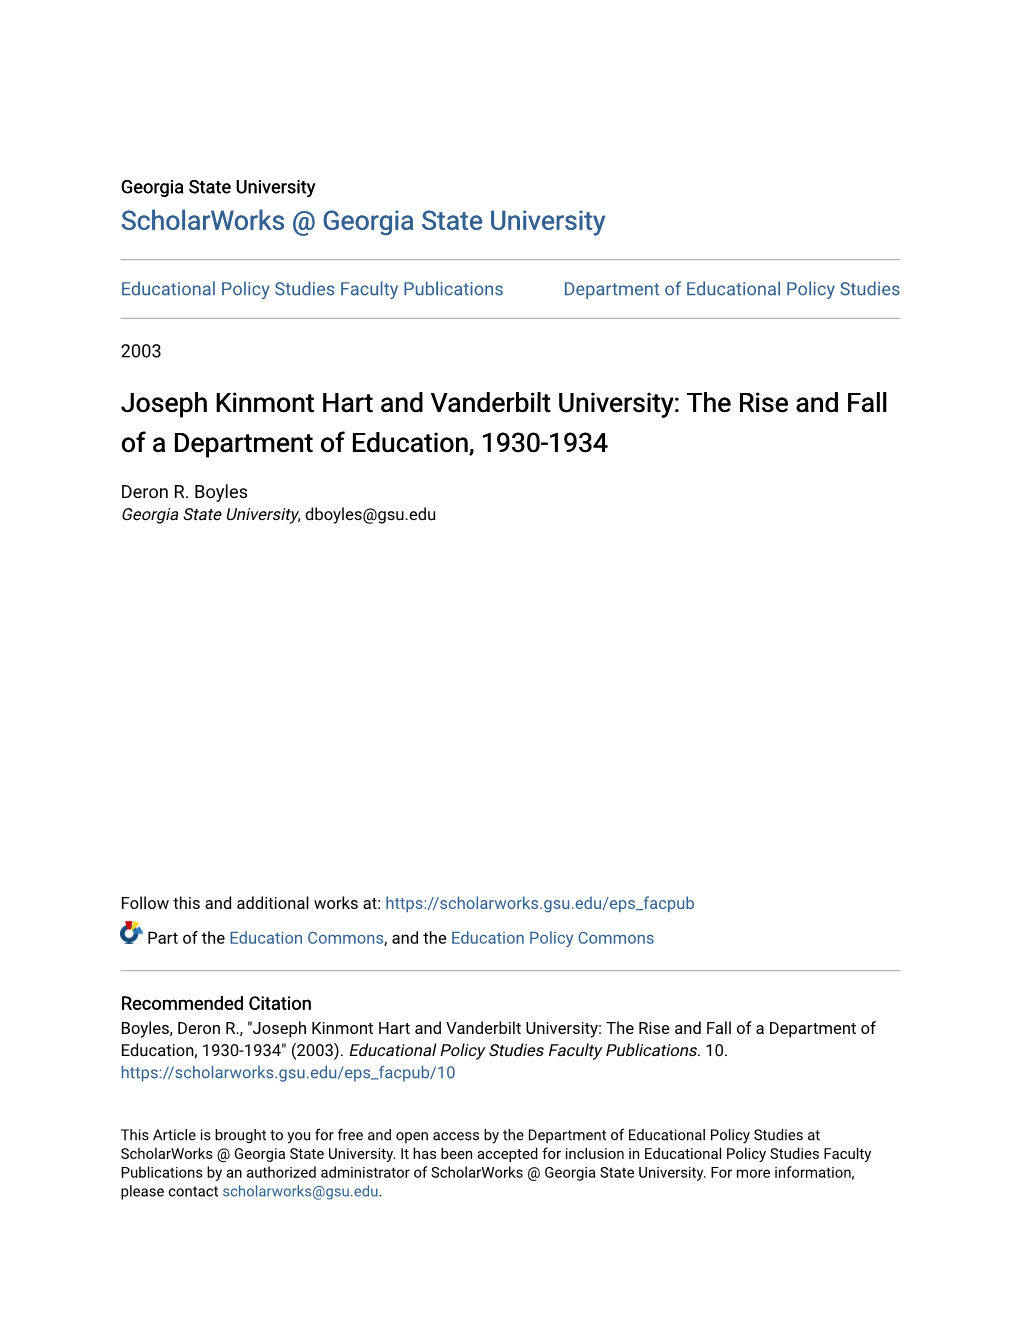 Joseph Kinmont Hart and Vanderbilt University: the Rise and Fall of a Department of Education, 1930-1934